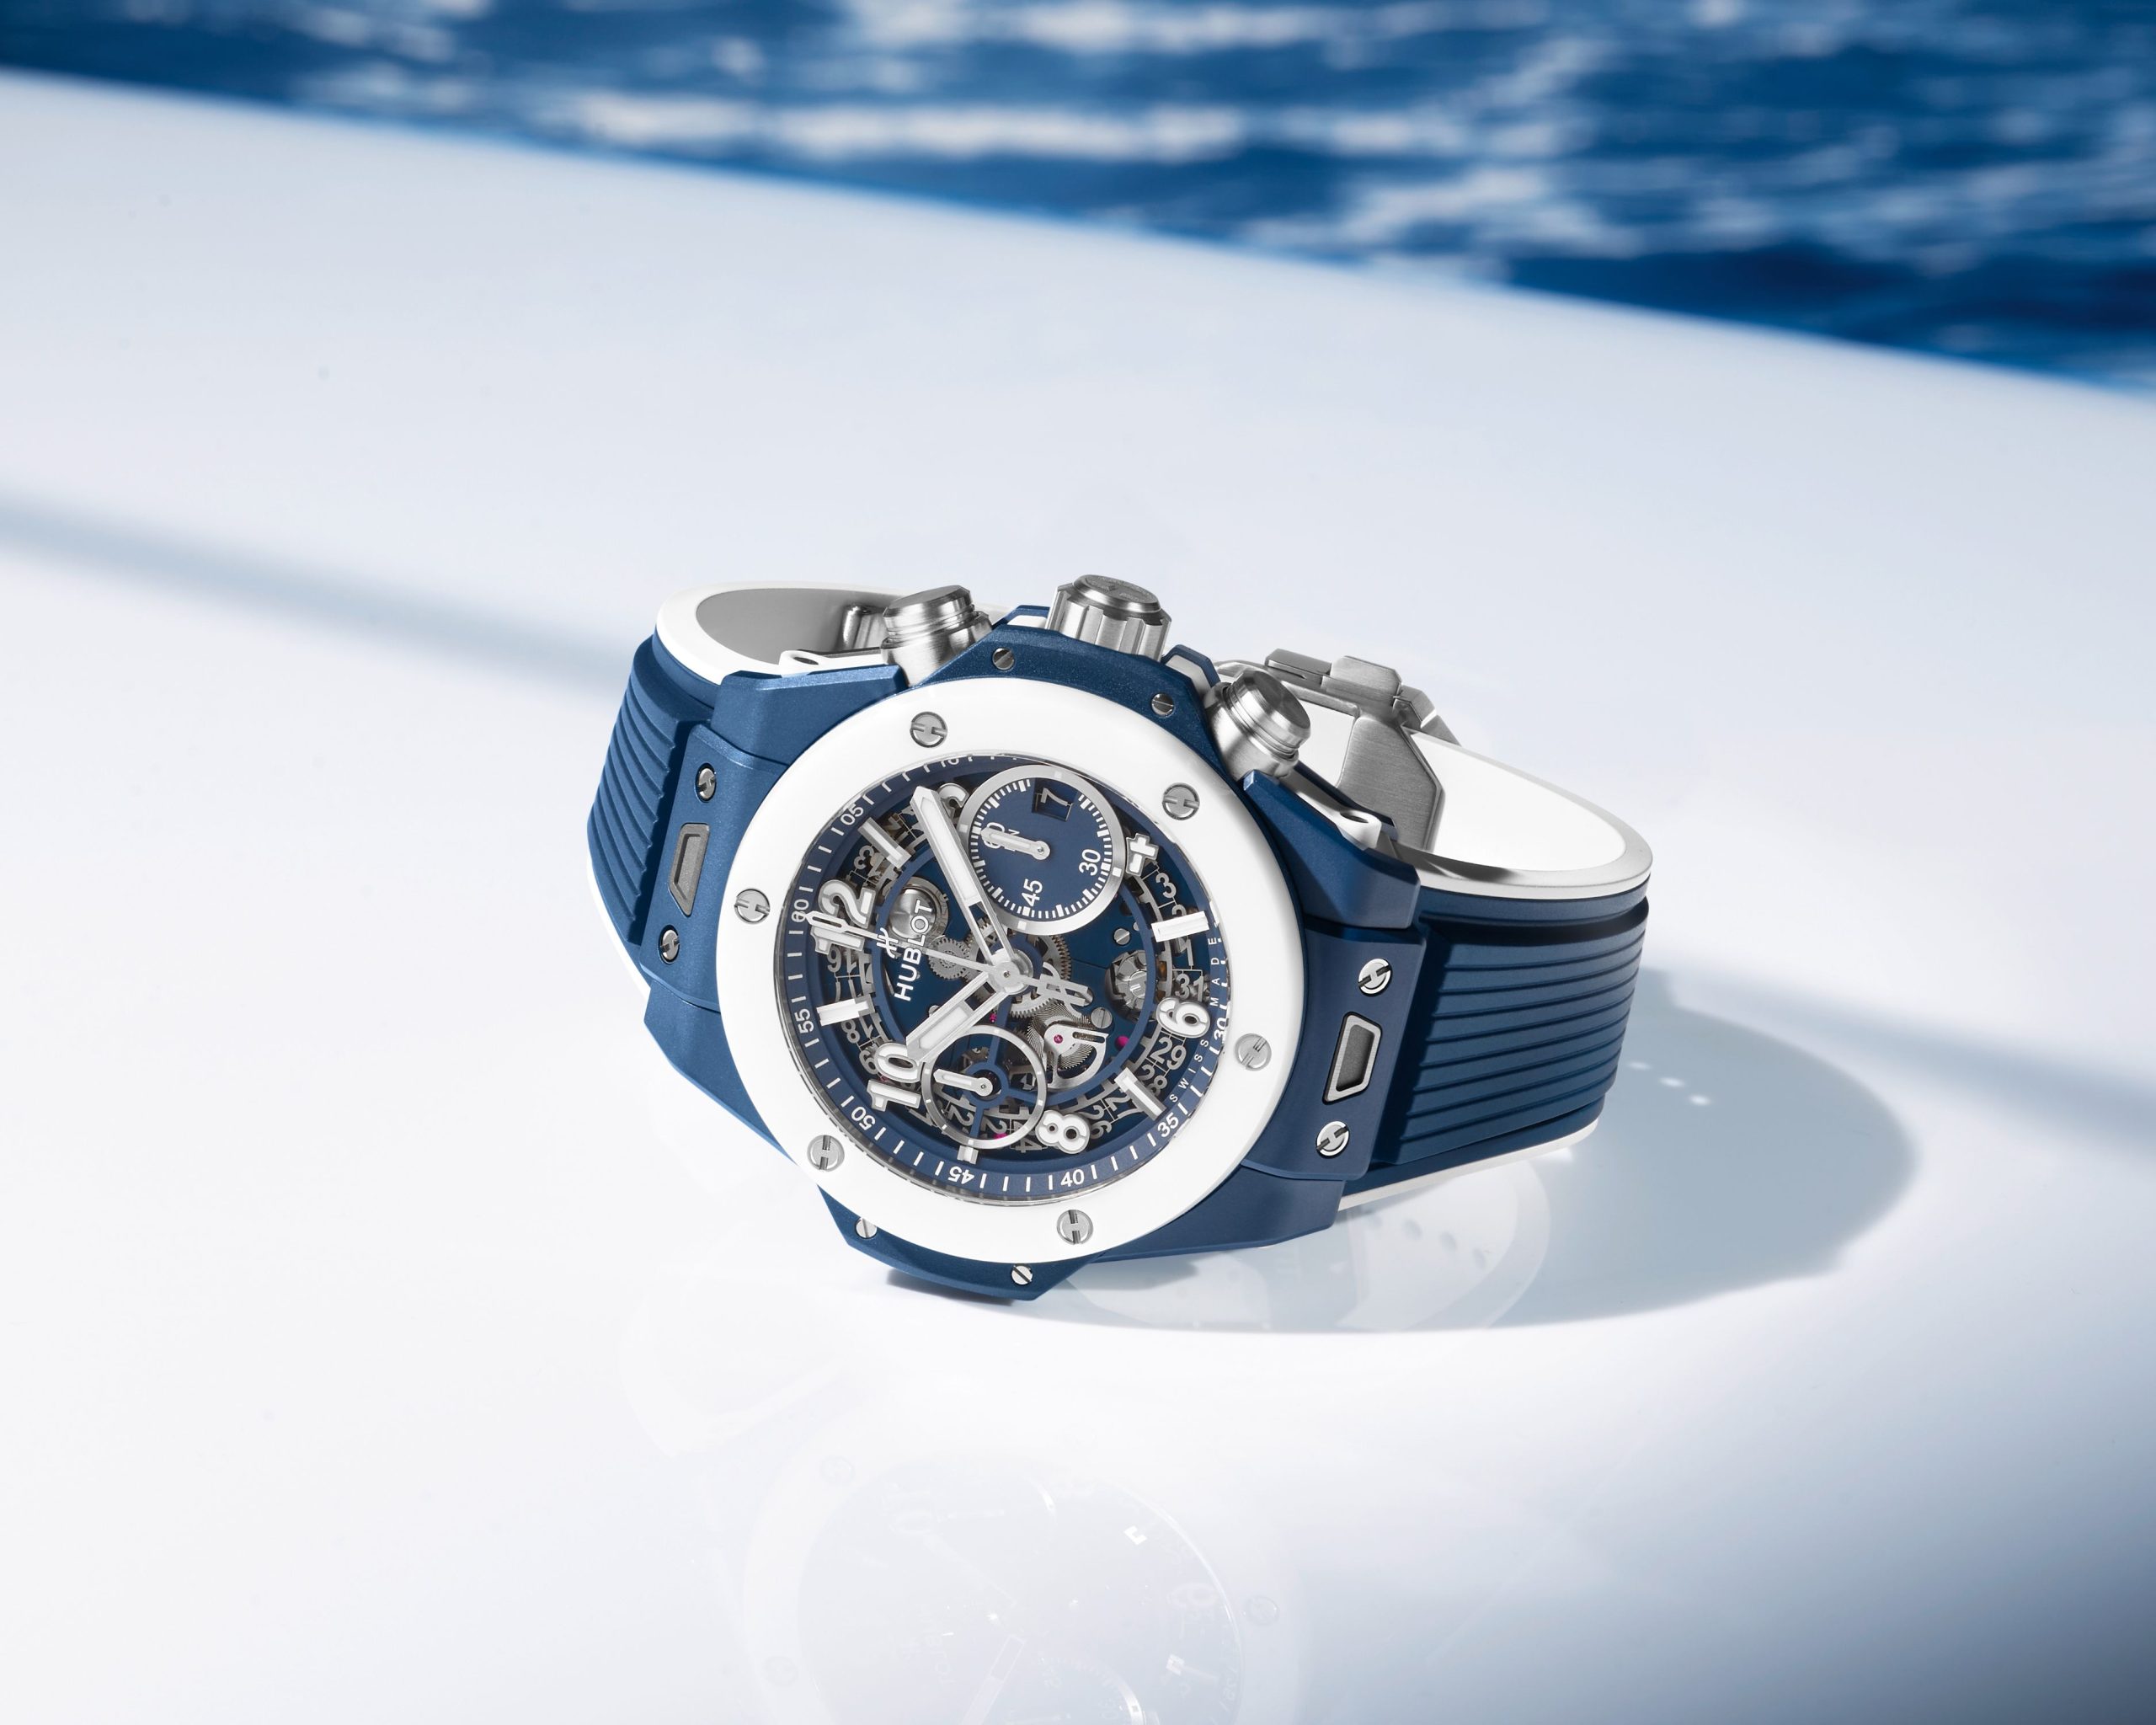 The Hublot Big Bang Unico Azur Welcomes Summer In Style